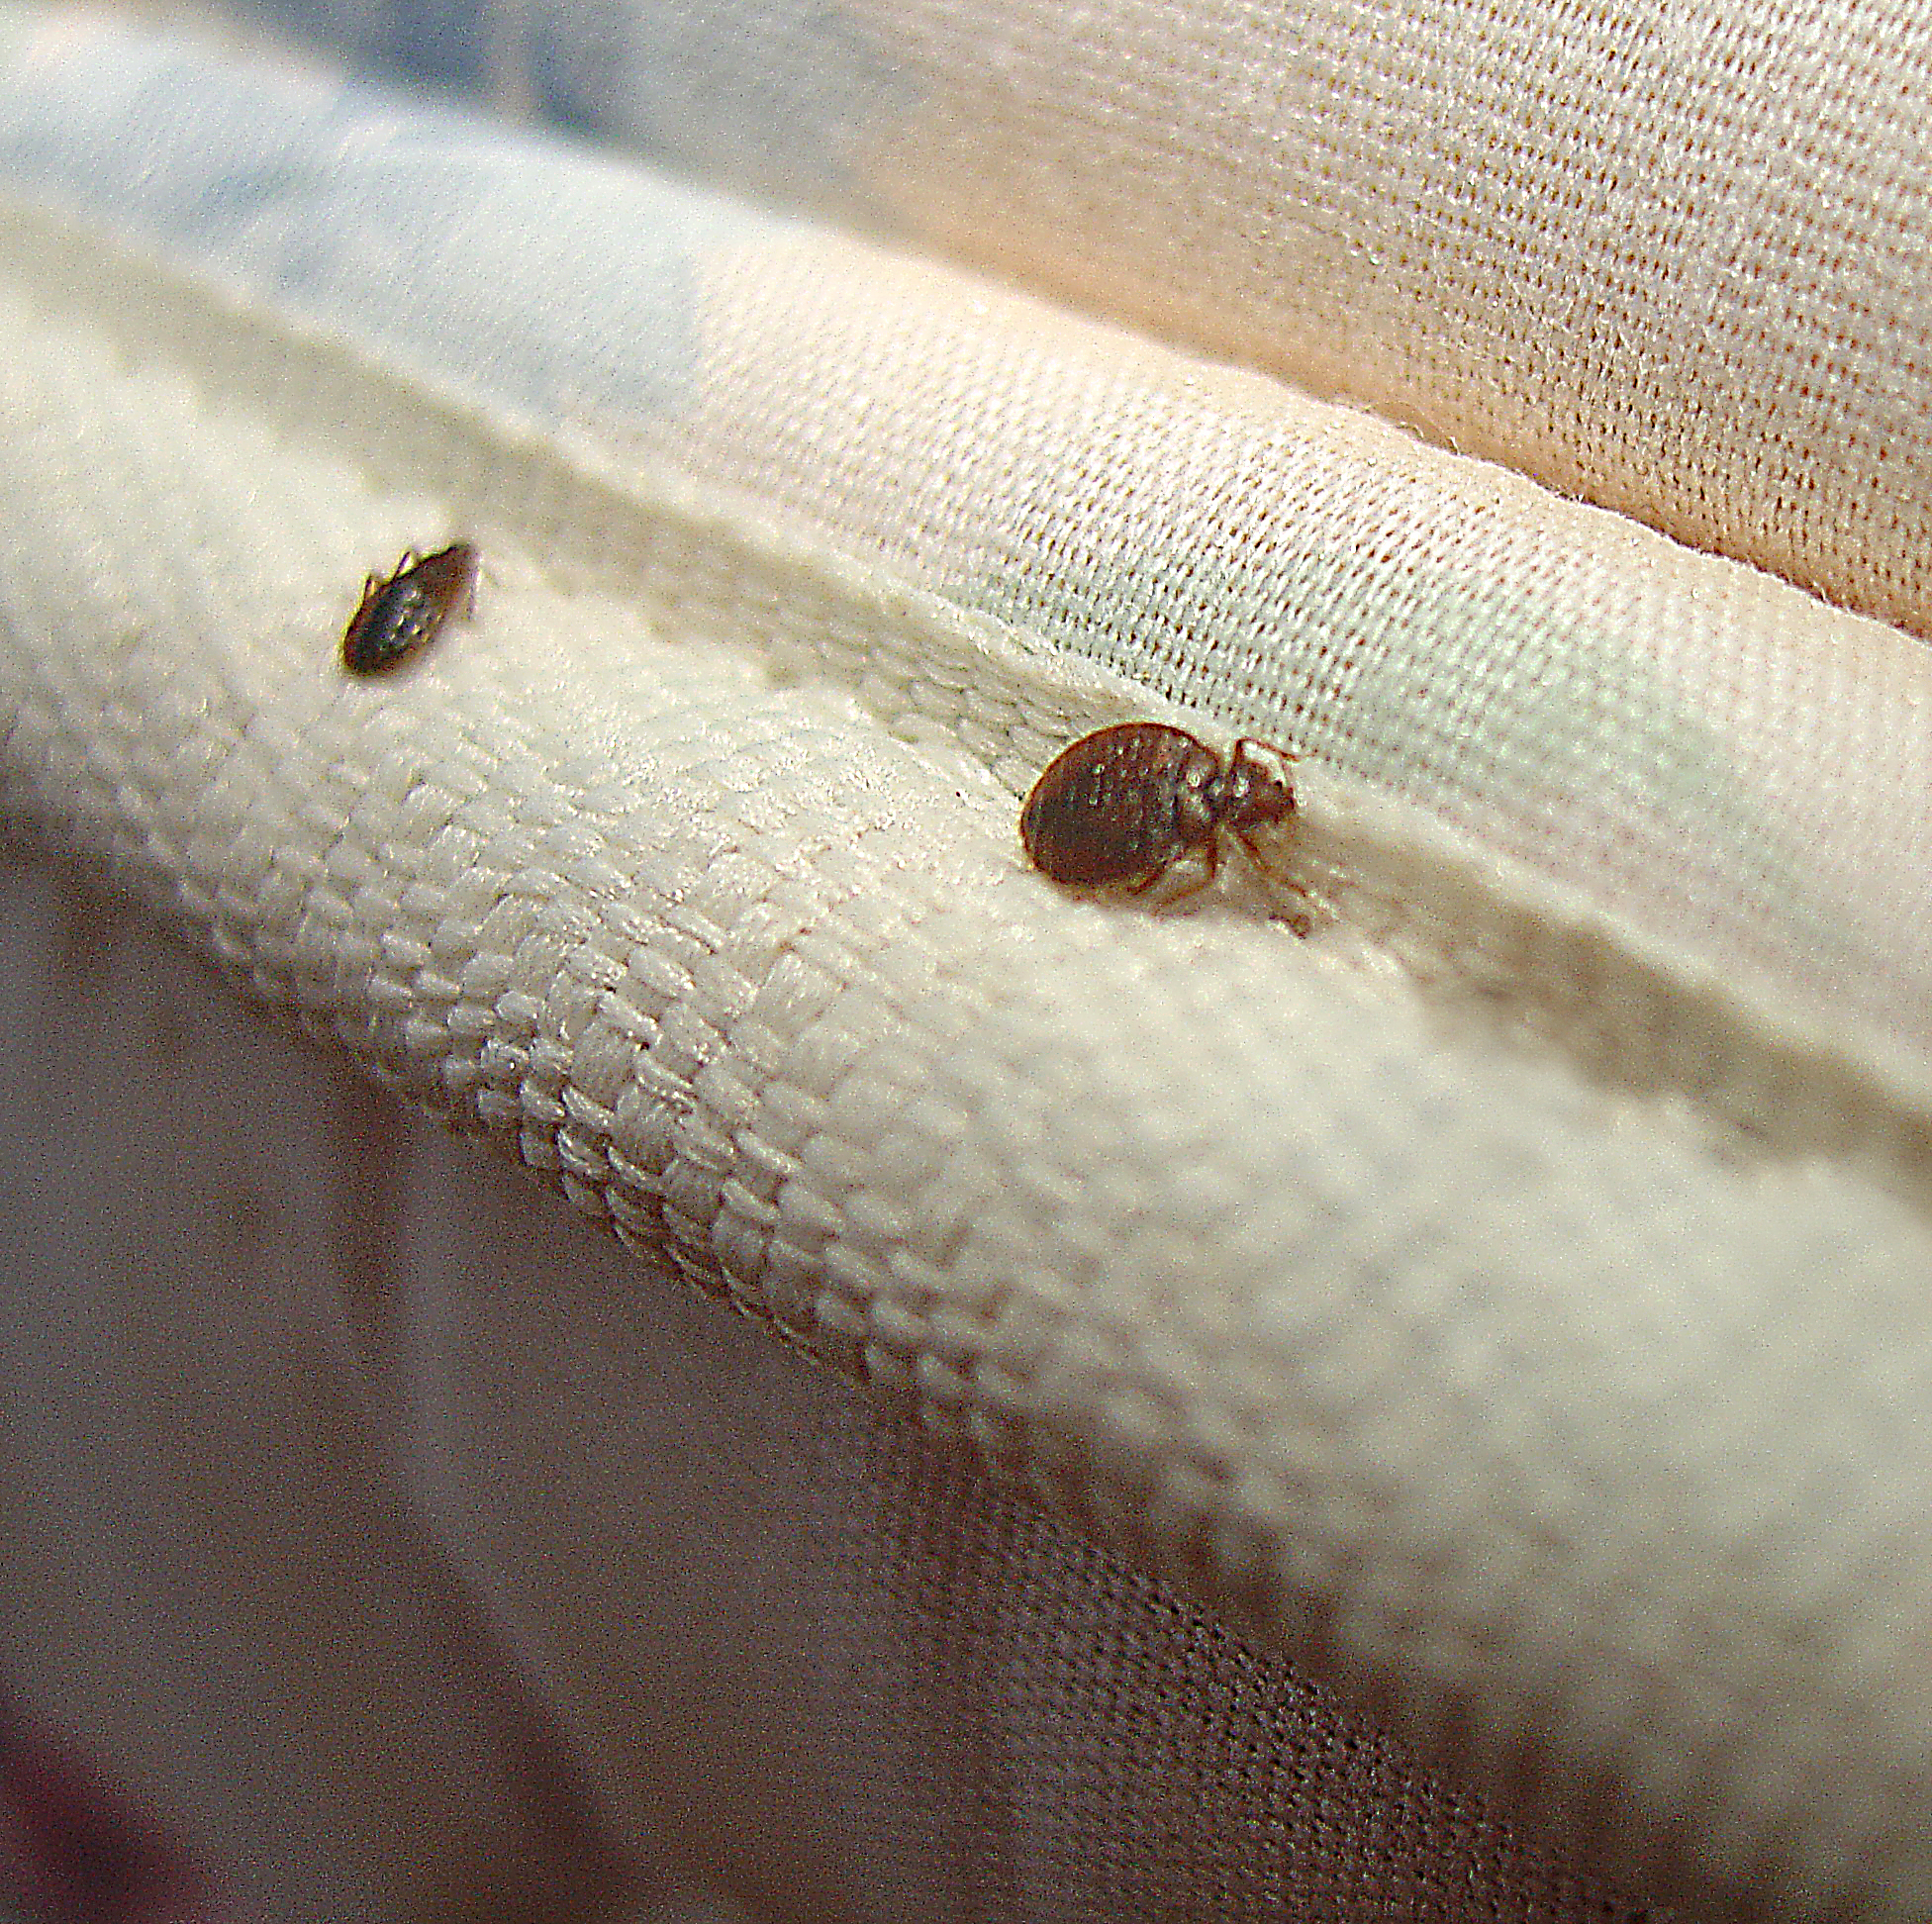 how-to-detect-bedbugs-bed-bug-detection